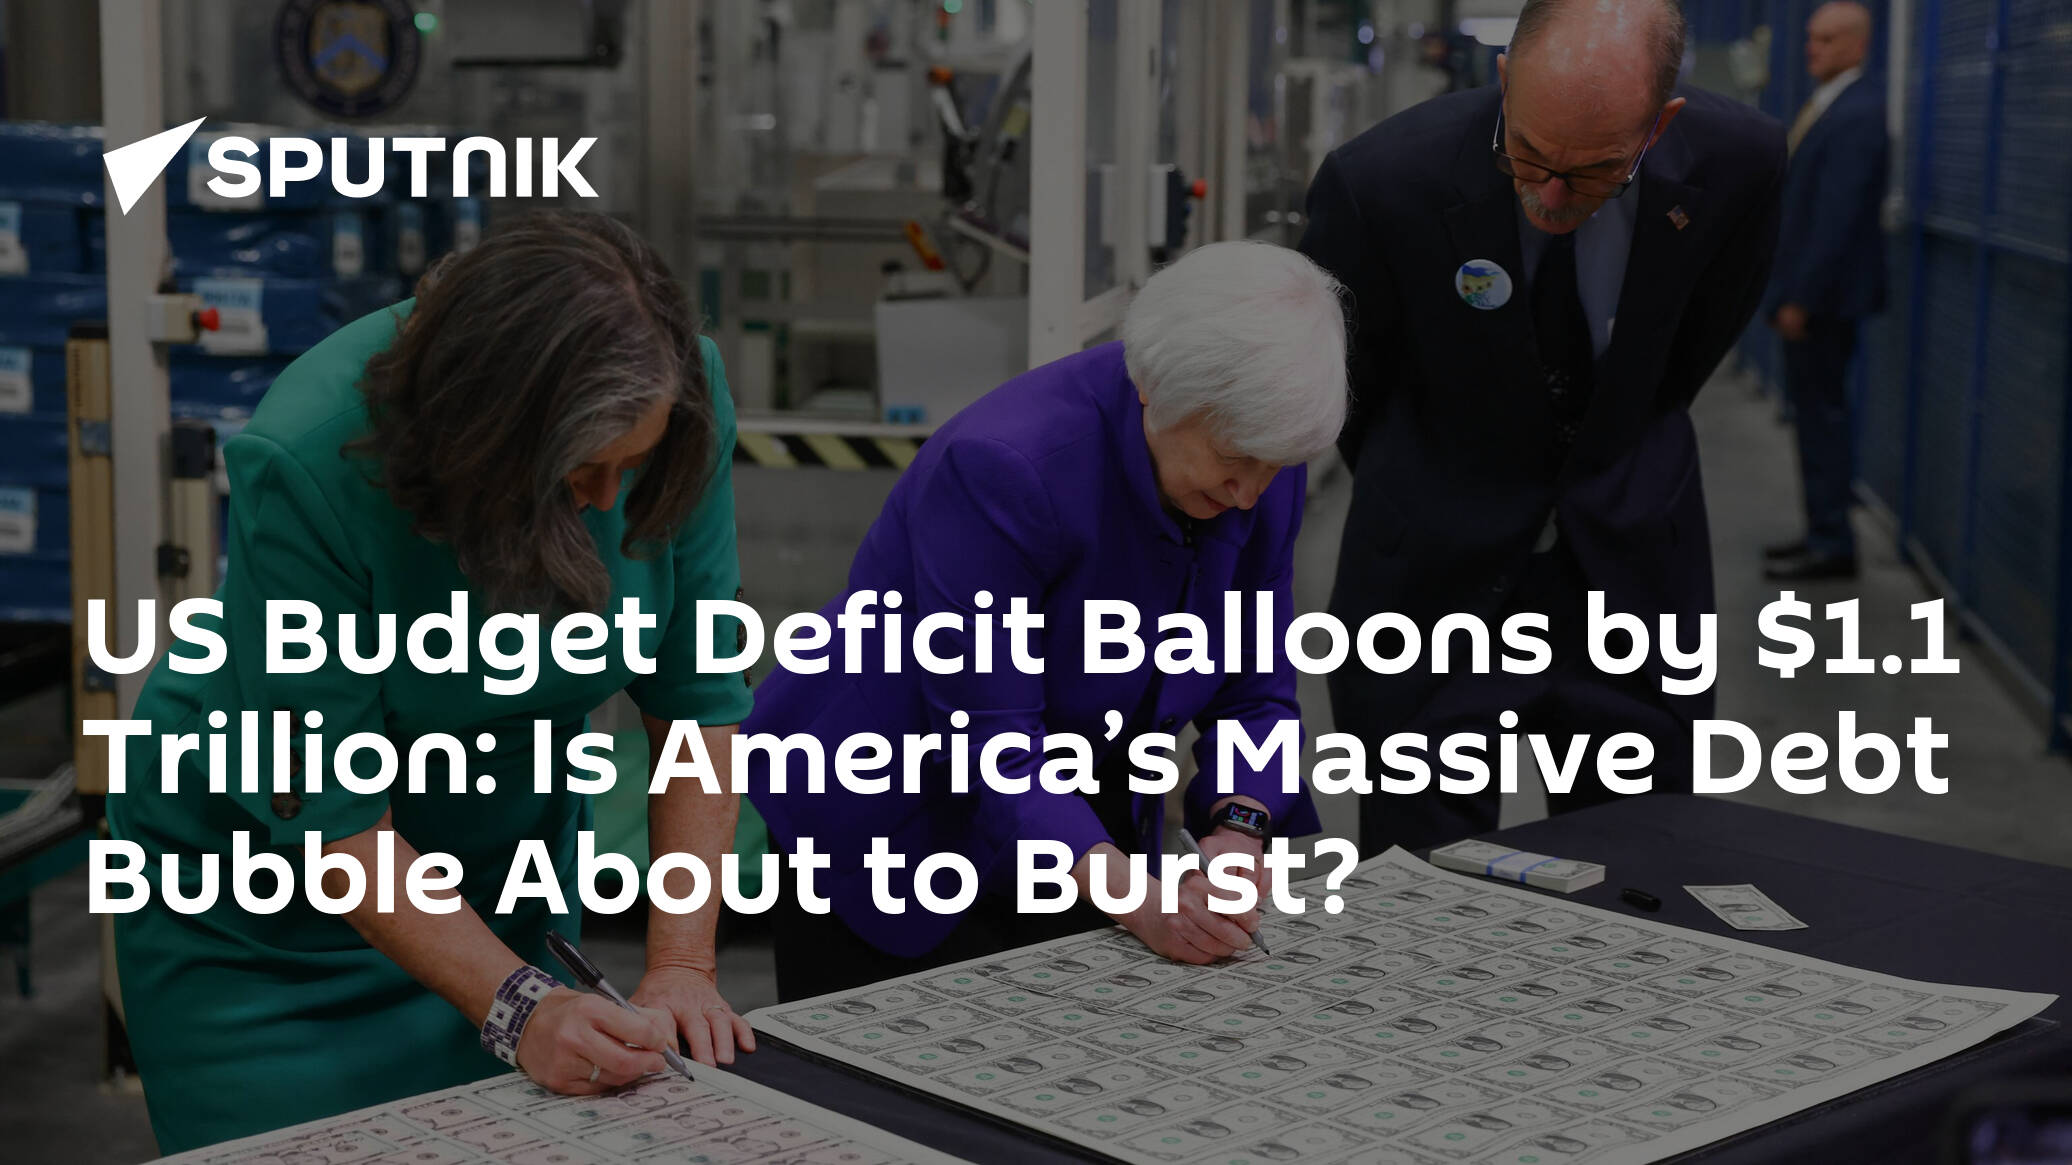 US Budget Deficit Balloons by .1 Trillion: Is America’s Massive Debt Bubble About to Burst?